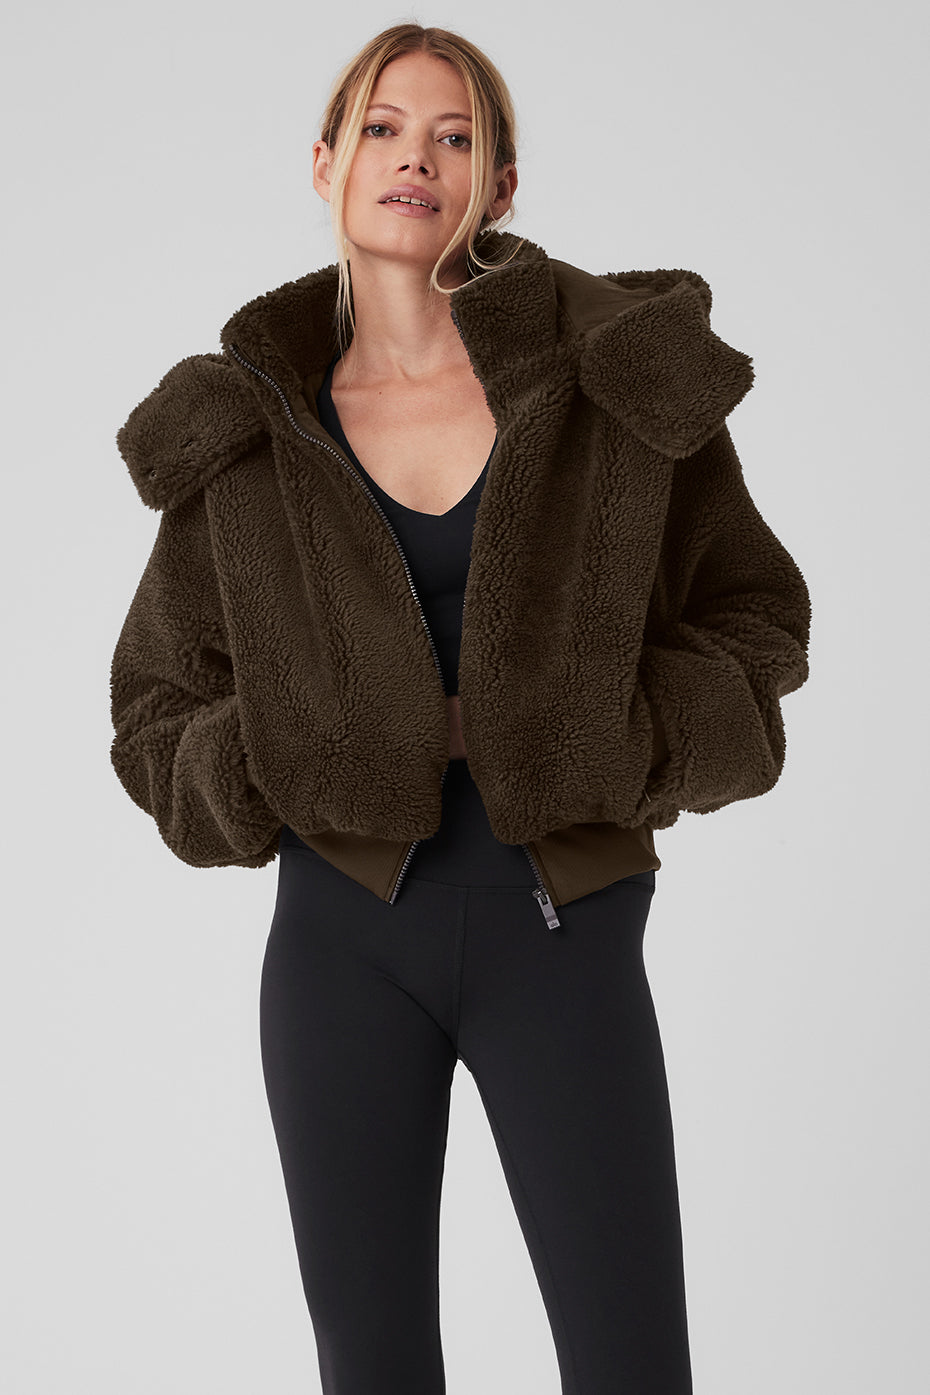 Fit Review Friday! Alo Yoga Foxy Sherpa Jacket in Pale Mauve!